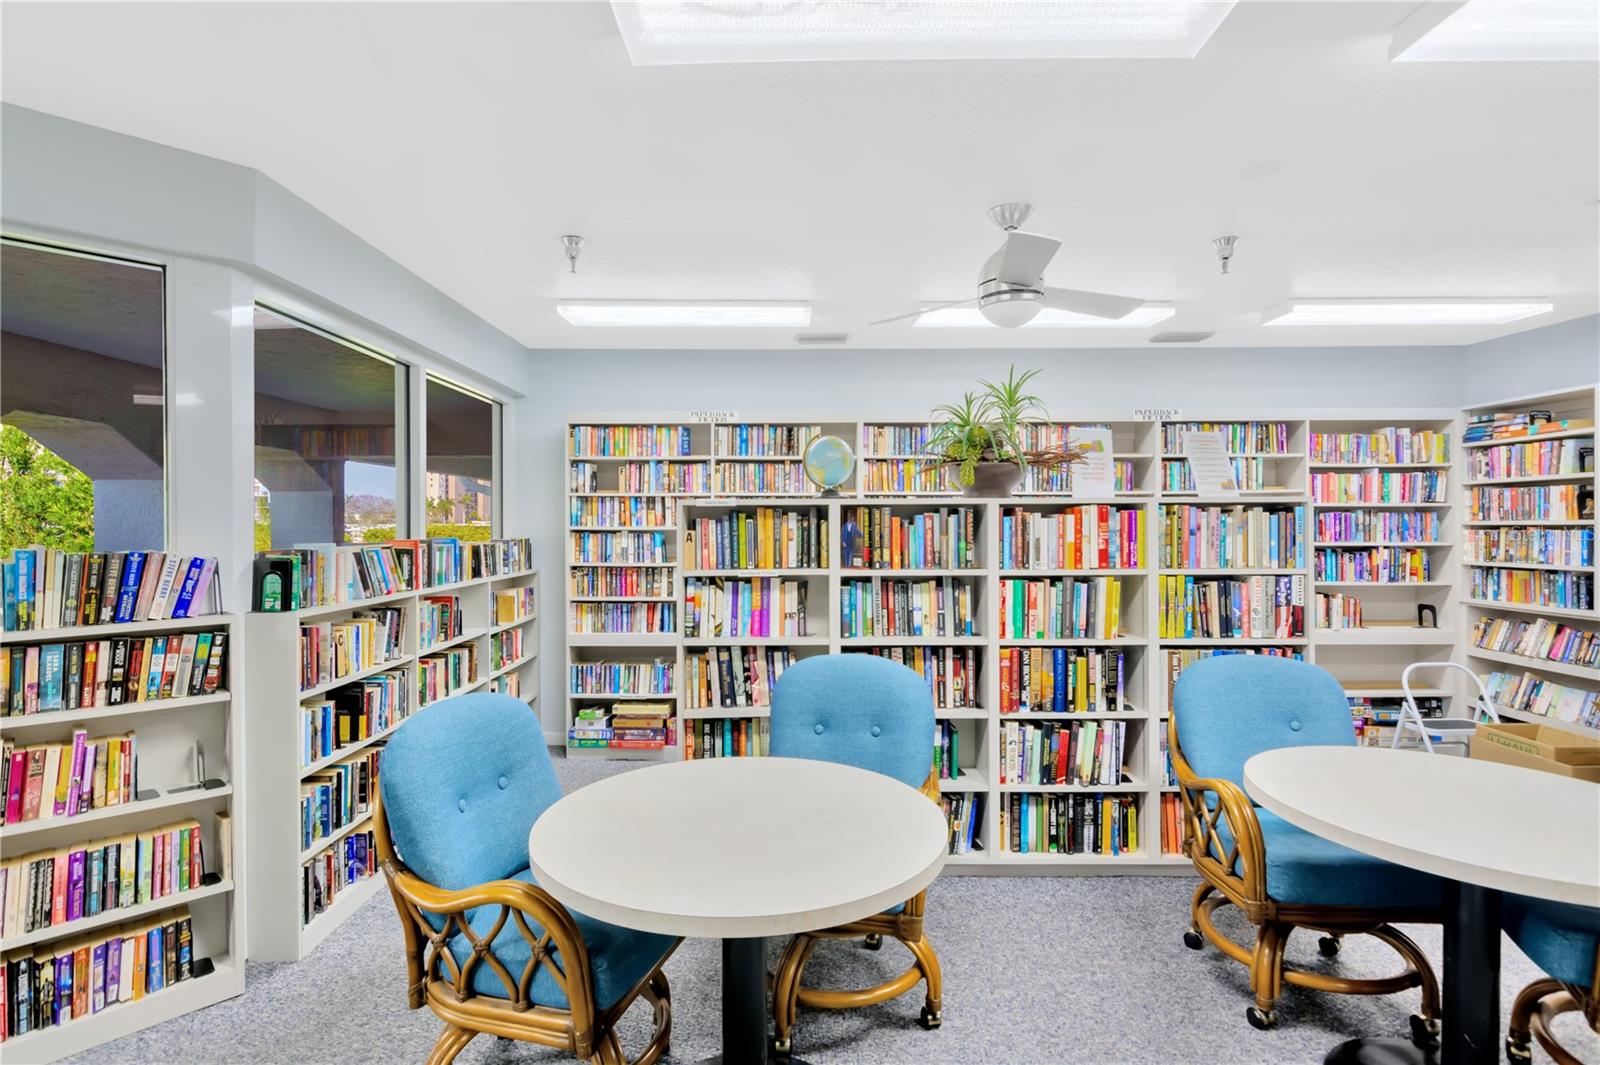 Community Library for all Residents of to enjoy.